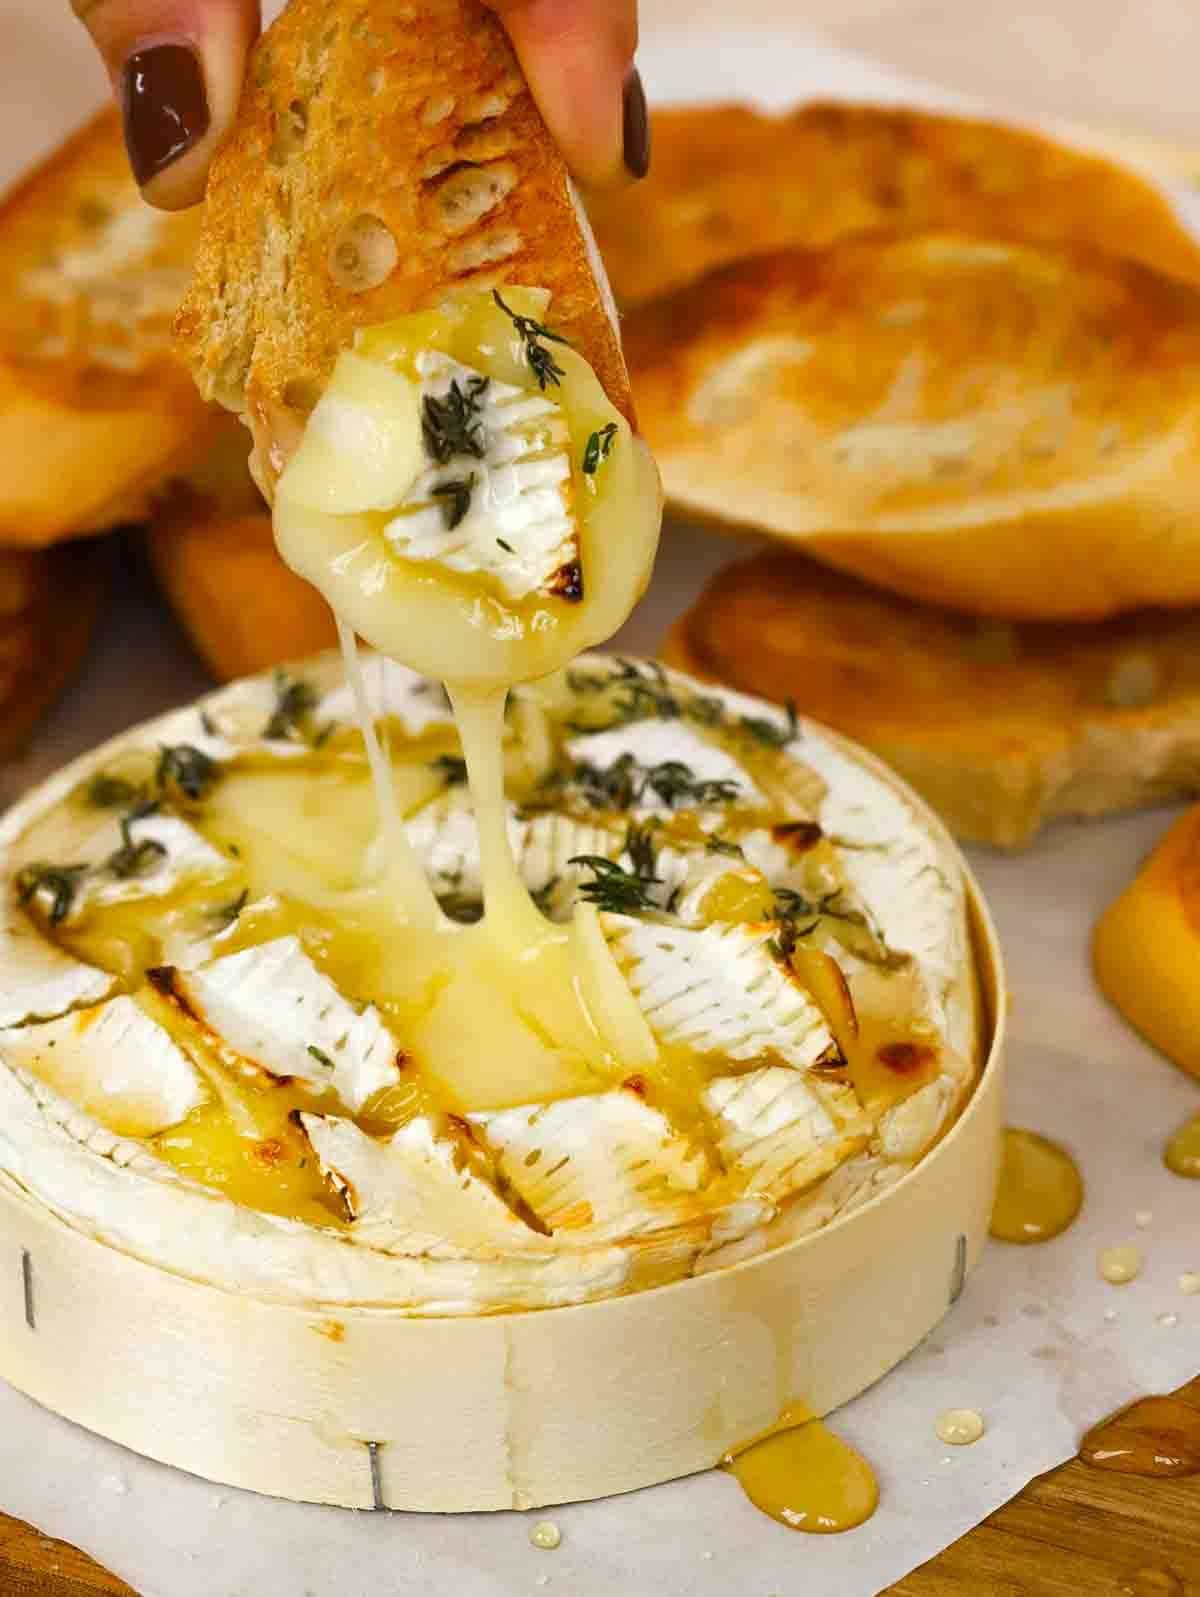 A baked camembert cheese with a hand dipping French crunchy bread into it as it oozes.